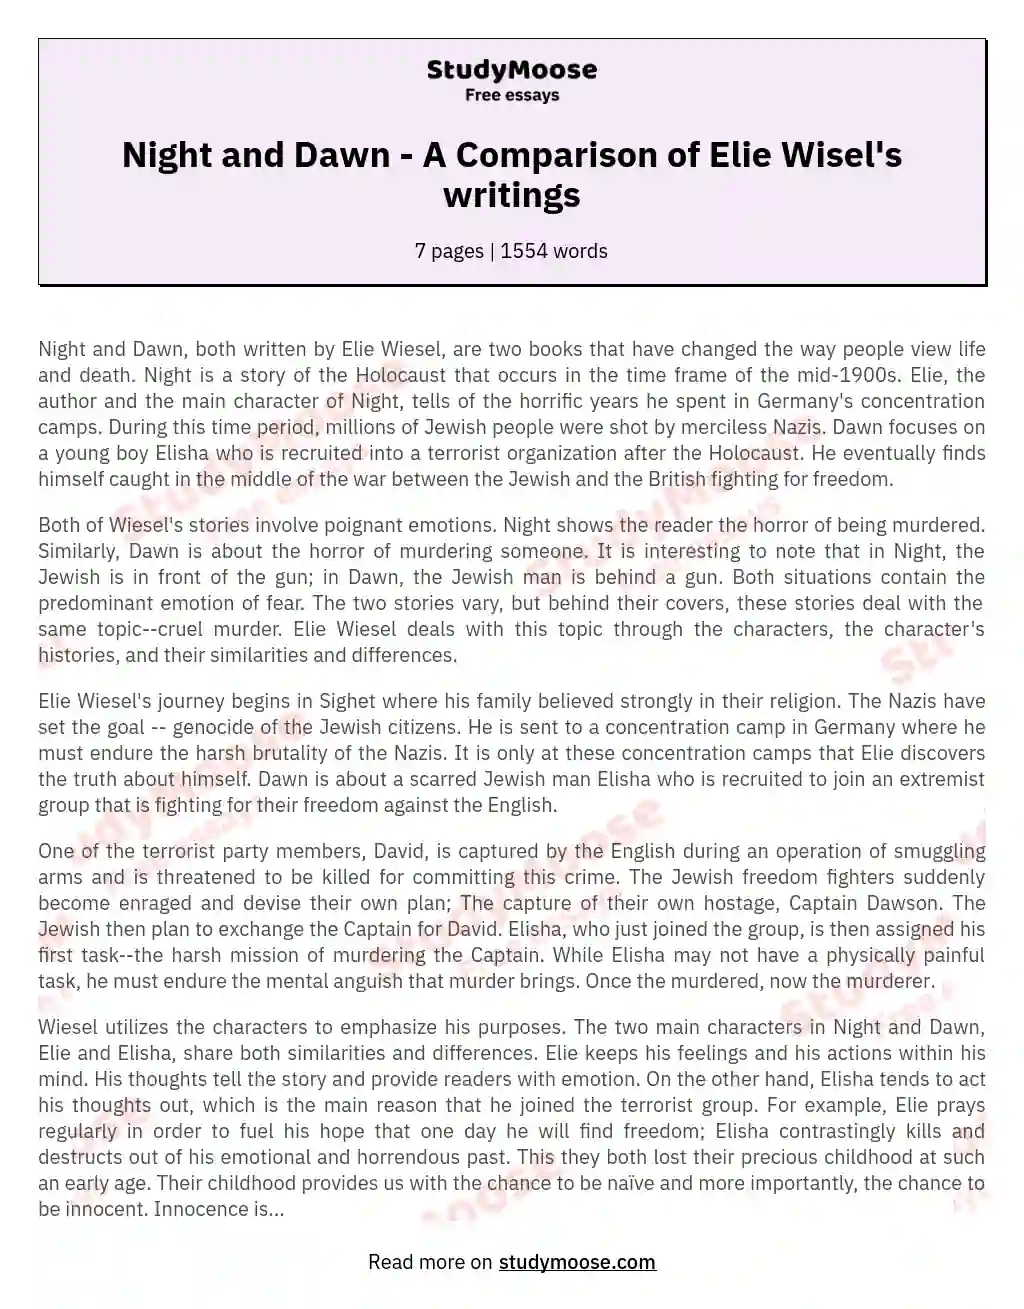 Night and Dawn - A Comparison of Elie Wisel's writings essay